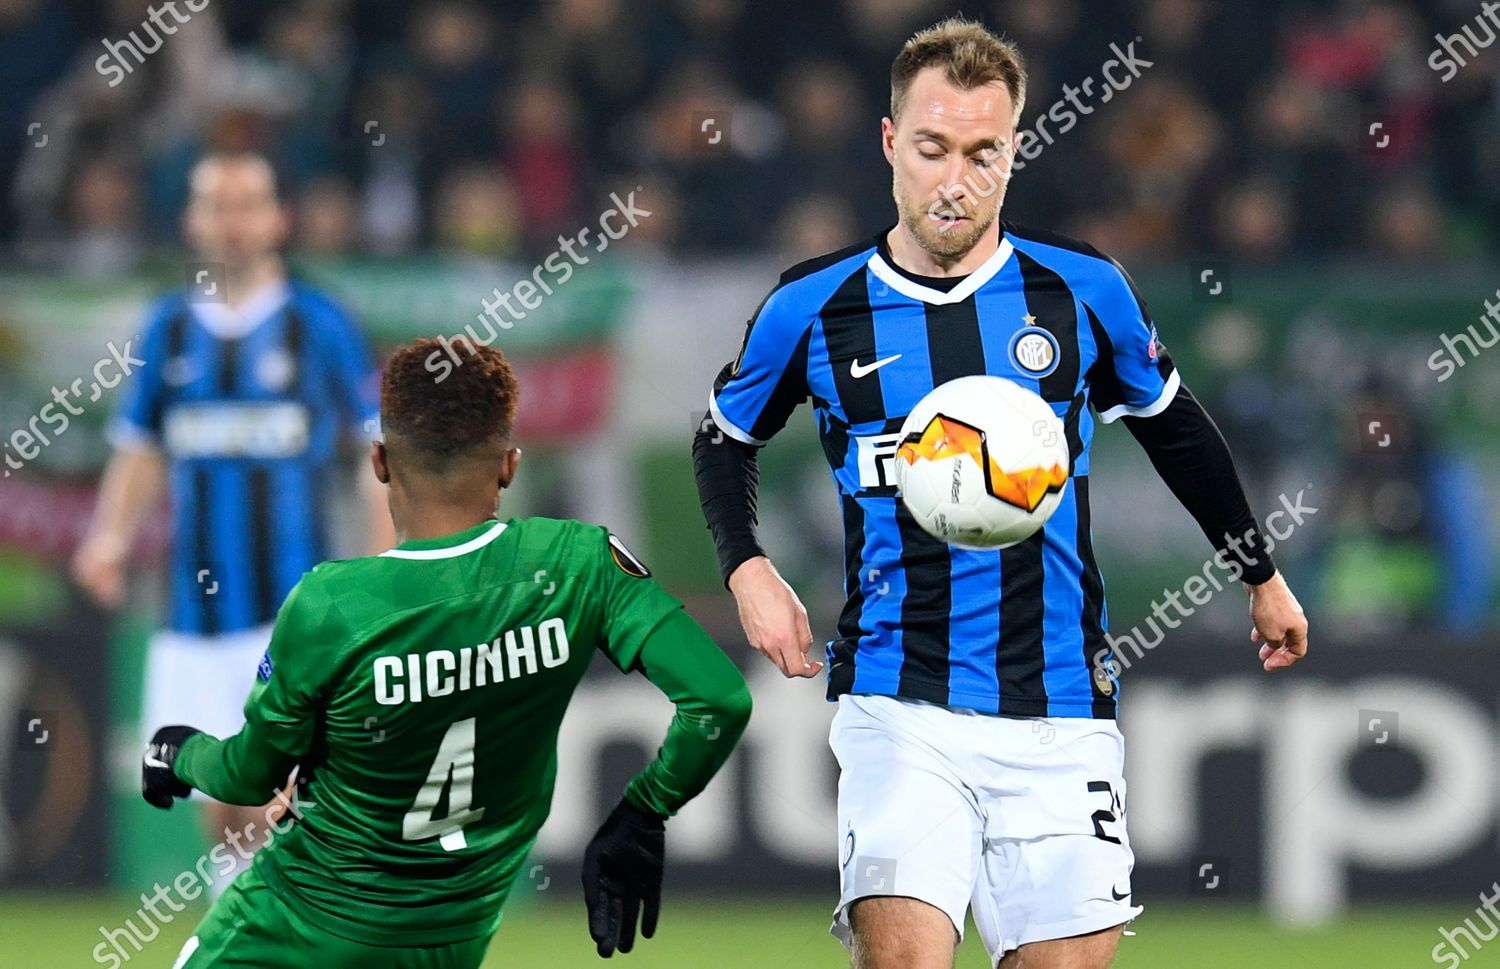 inters christian eriksen r action against cicinho editorial stock photo stock image shutterstock